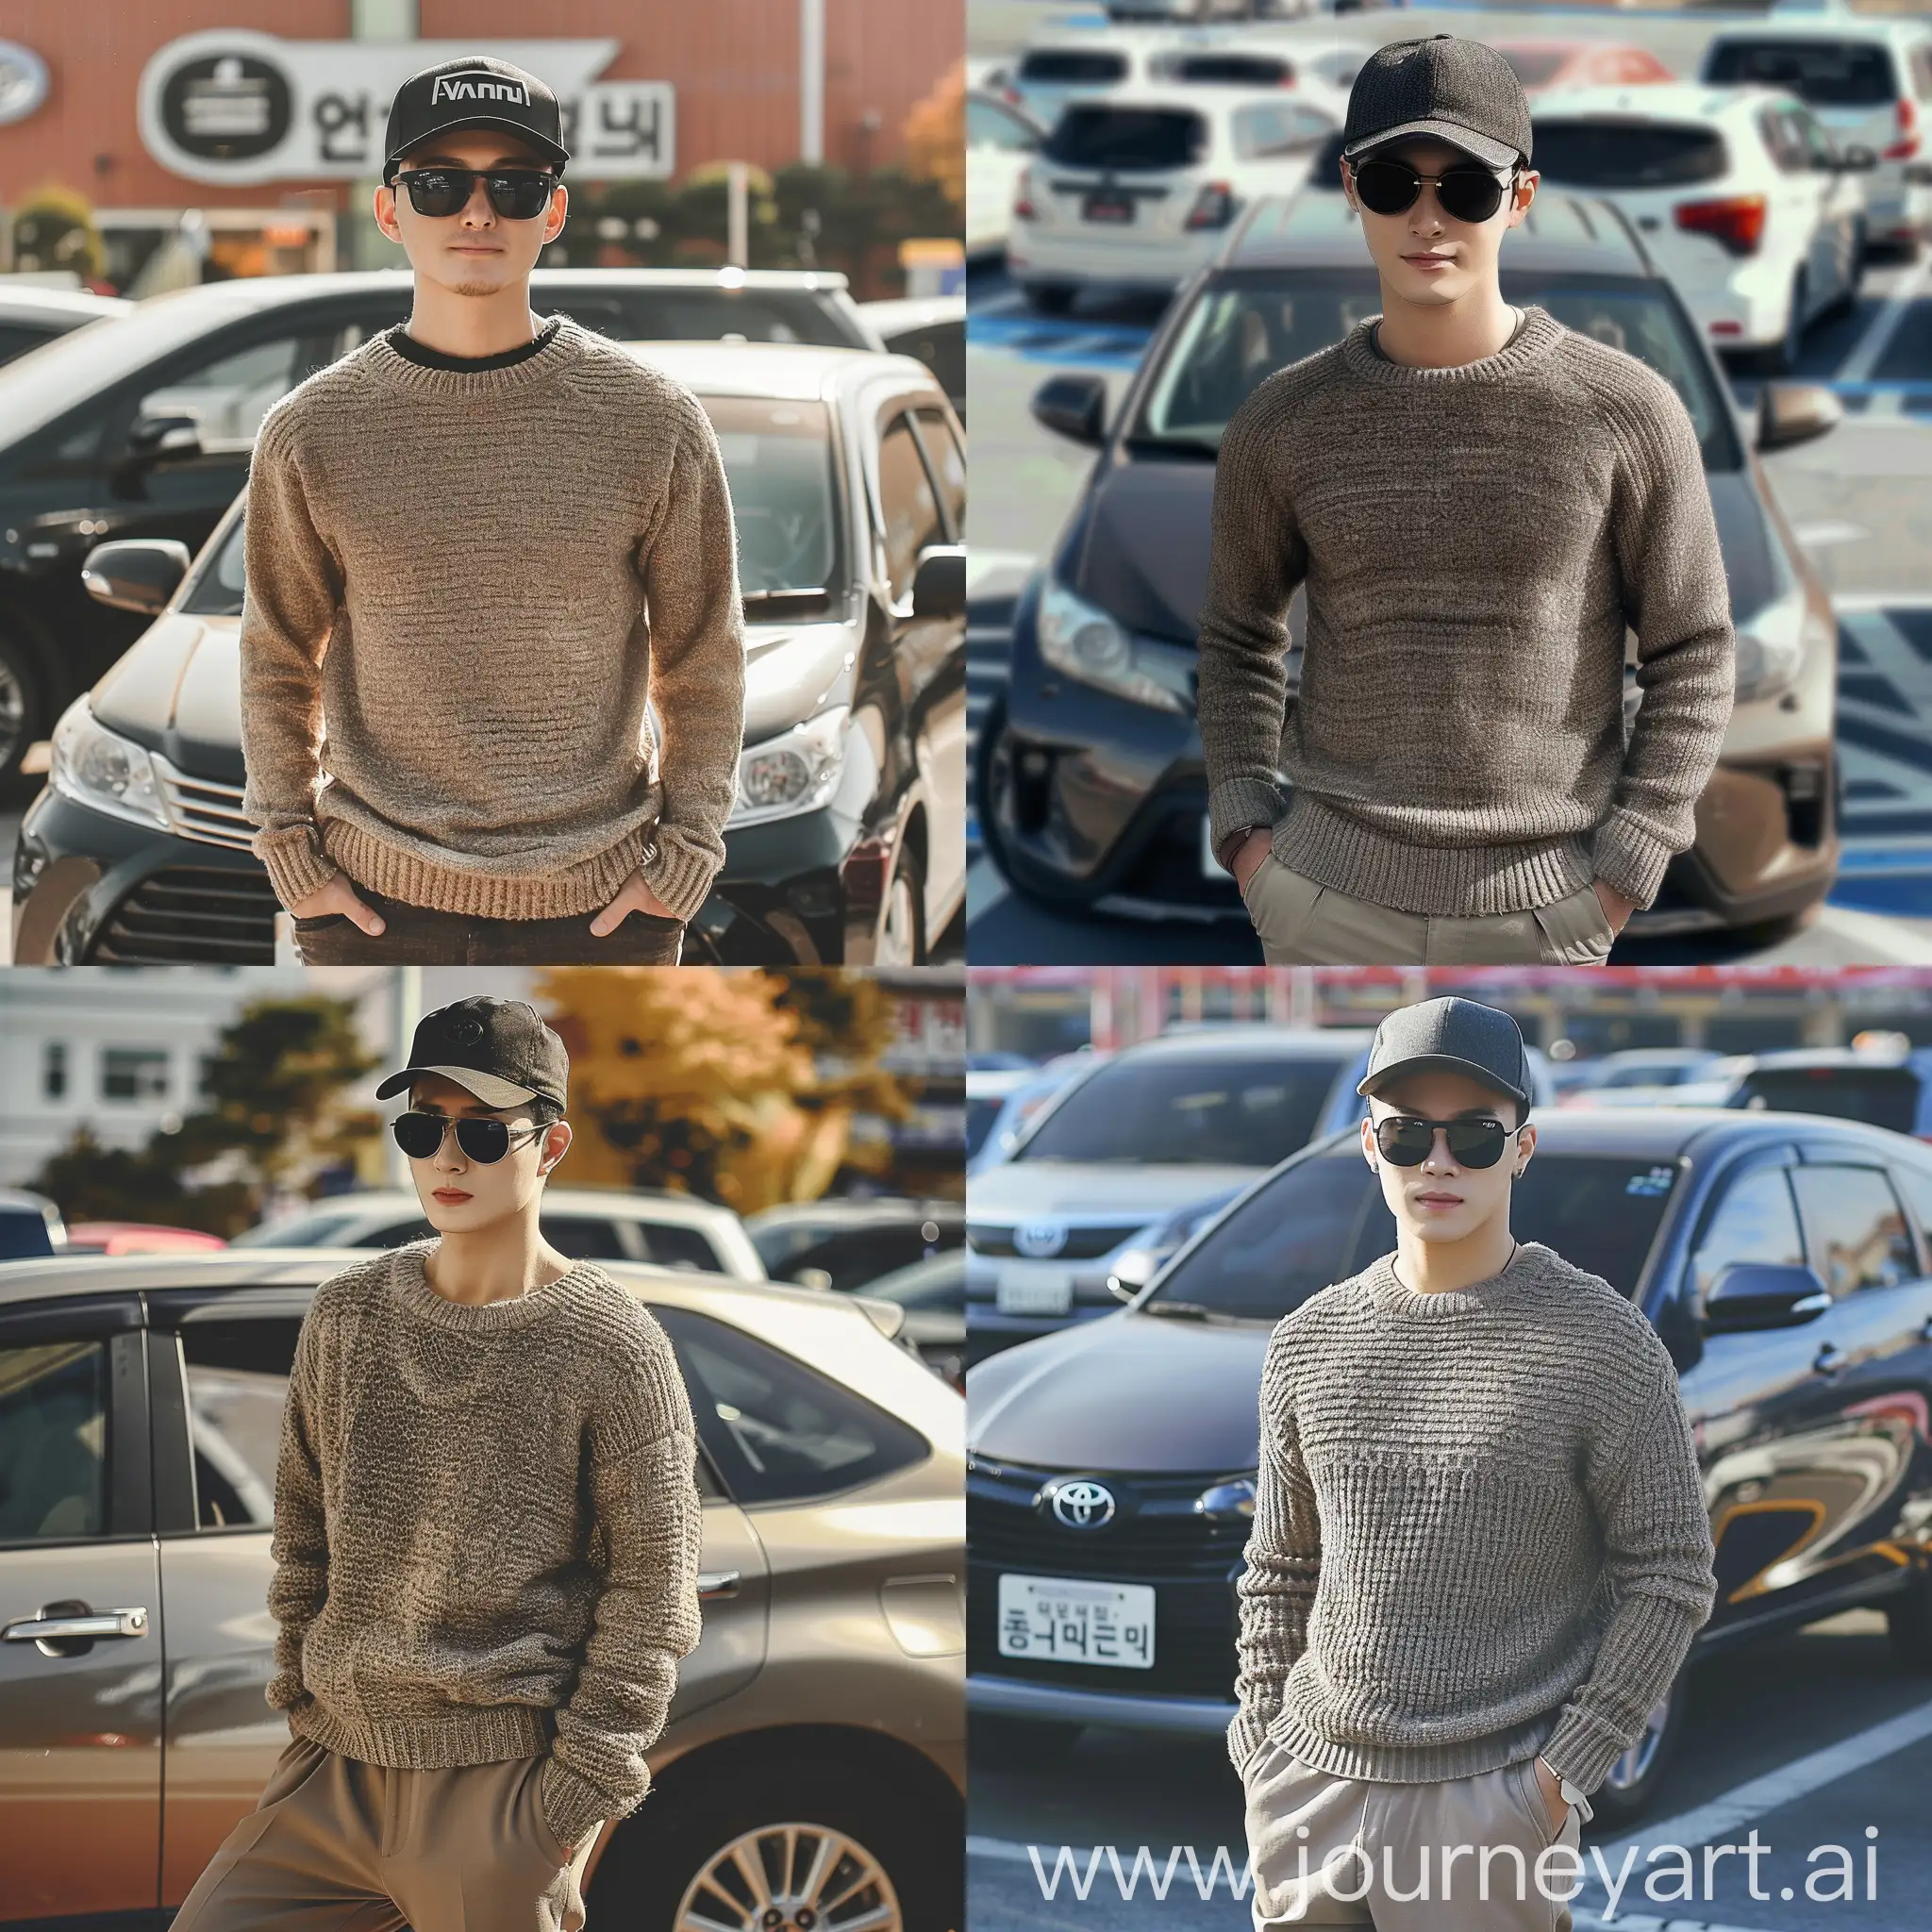 Description of a 30-year-old handsome Korean man with a clean face wearing a baseball cap, black sunglasses, a thick sweater, and long pants, standing in front of a Toyota Avanza car, with the background of a car parking lot showing cars parked in parallel, realistic HD. 